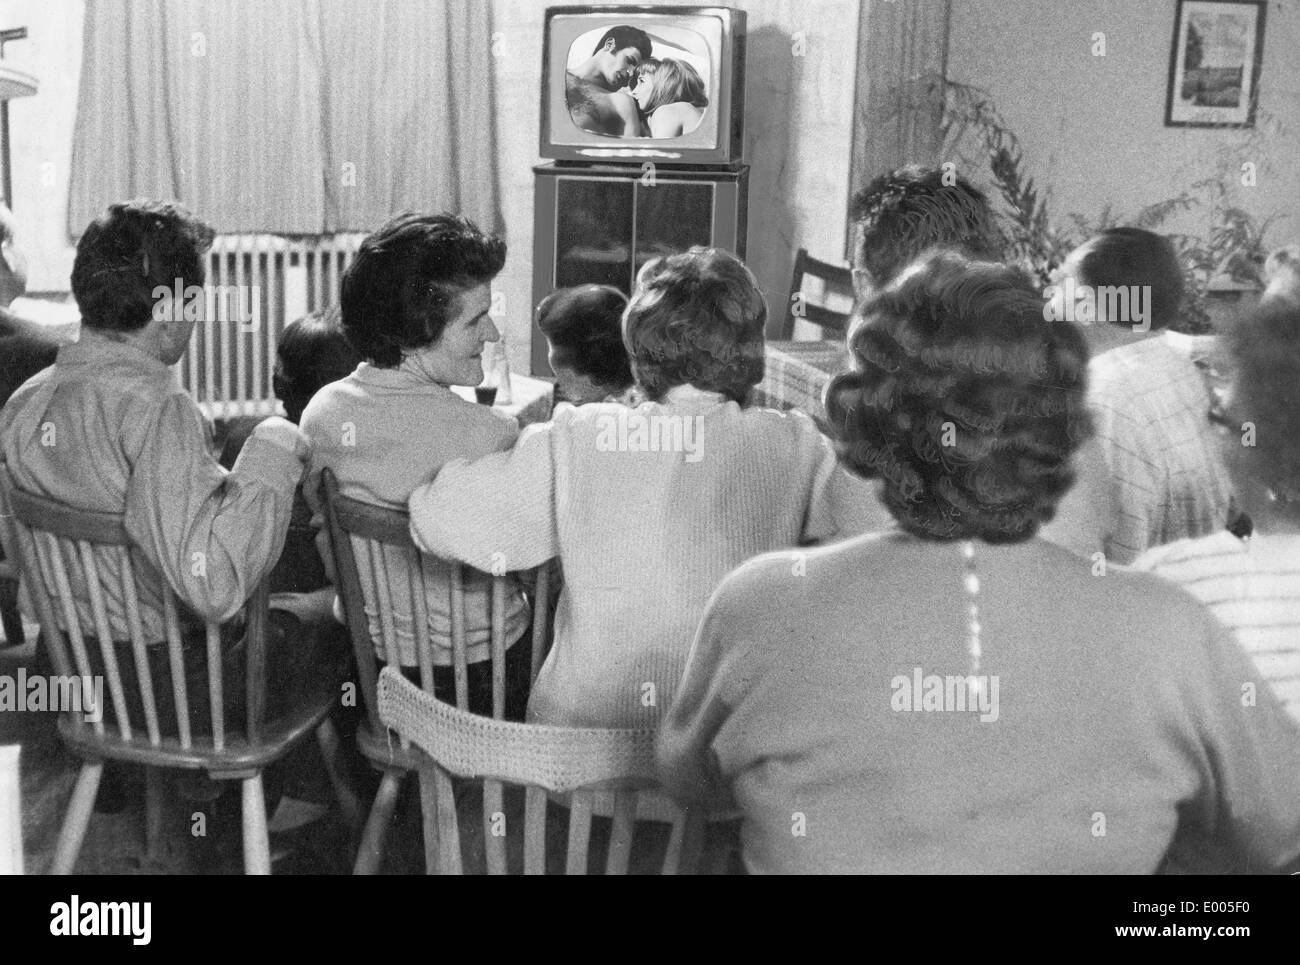 TV viewers in the 1950s Stock Photo